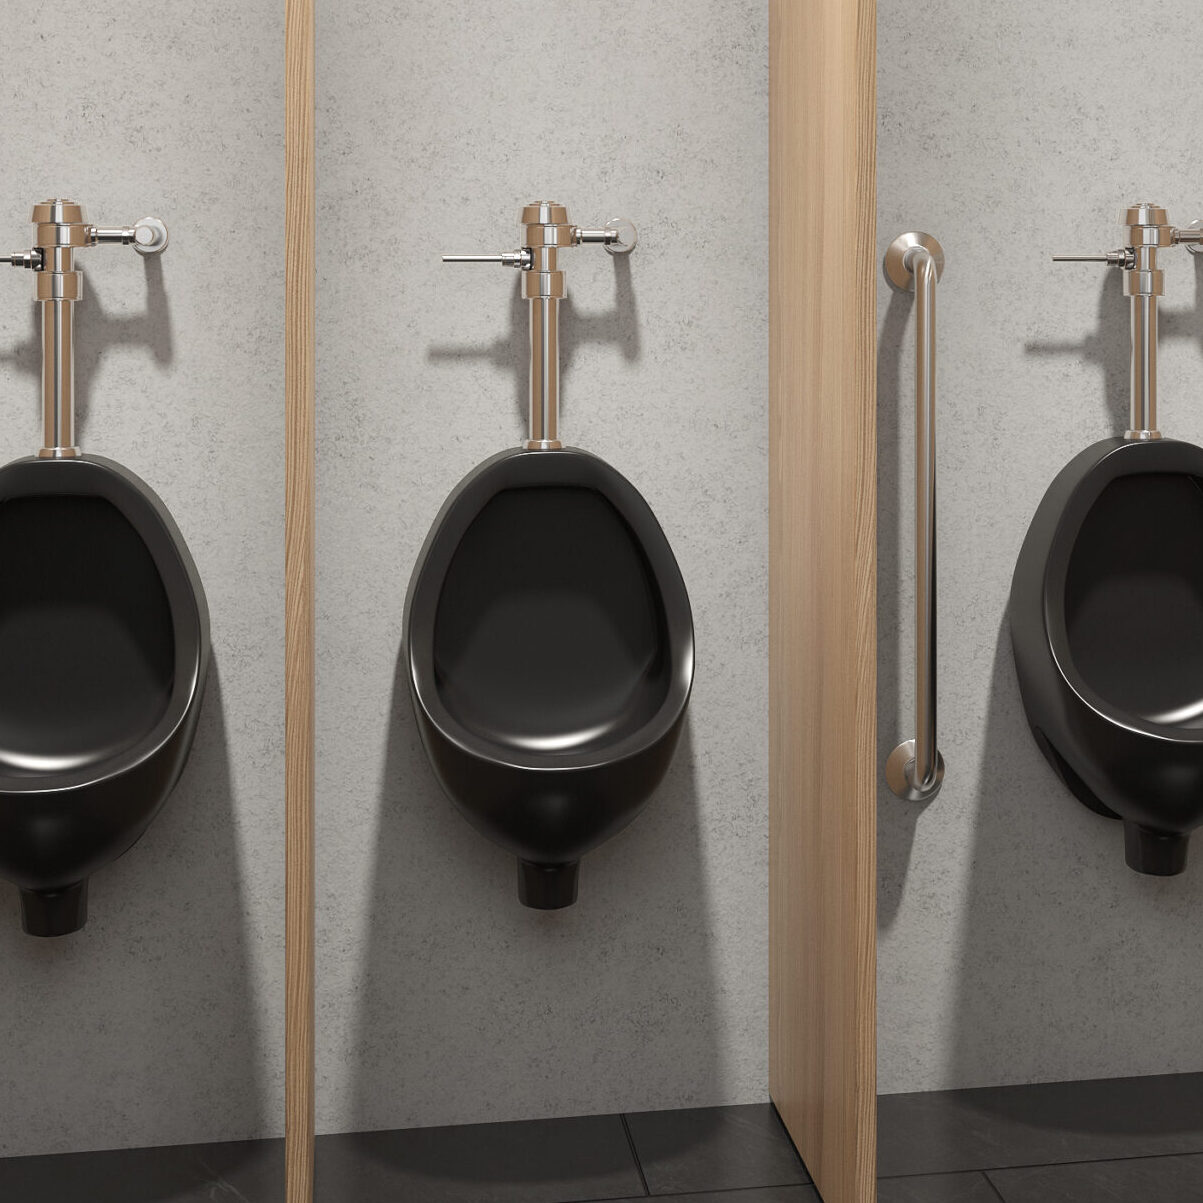 Kobly Wall Mounted Urinal in Matte Black - Room Scene